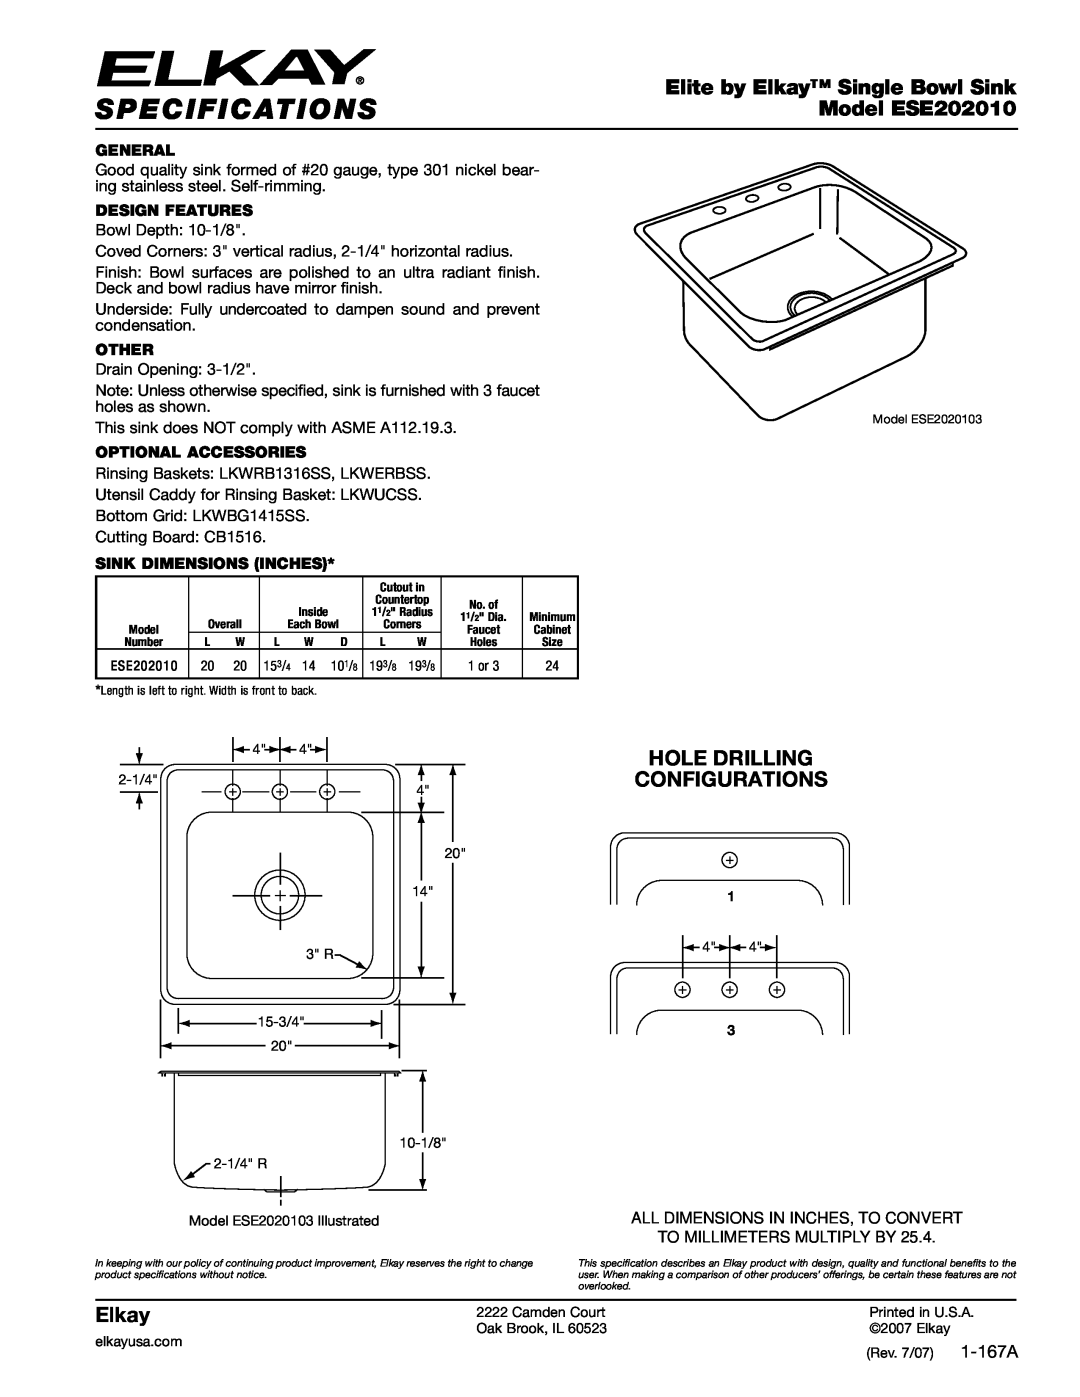 Elkay specifications Specifications, Elite by Elkay Single Bowl Sink, Model ESE202010, Hole Drilling Configurations 